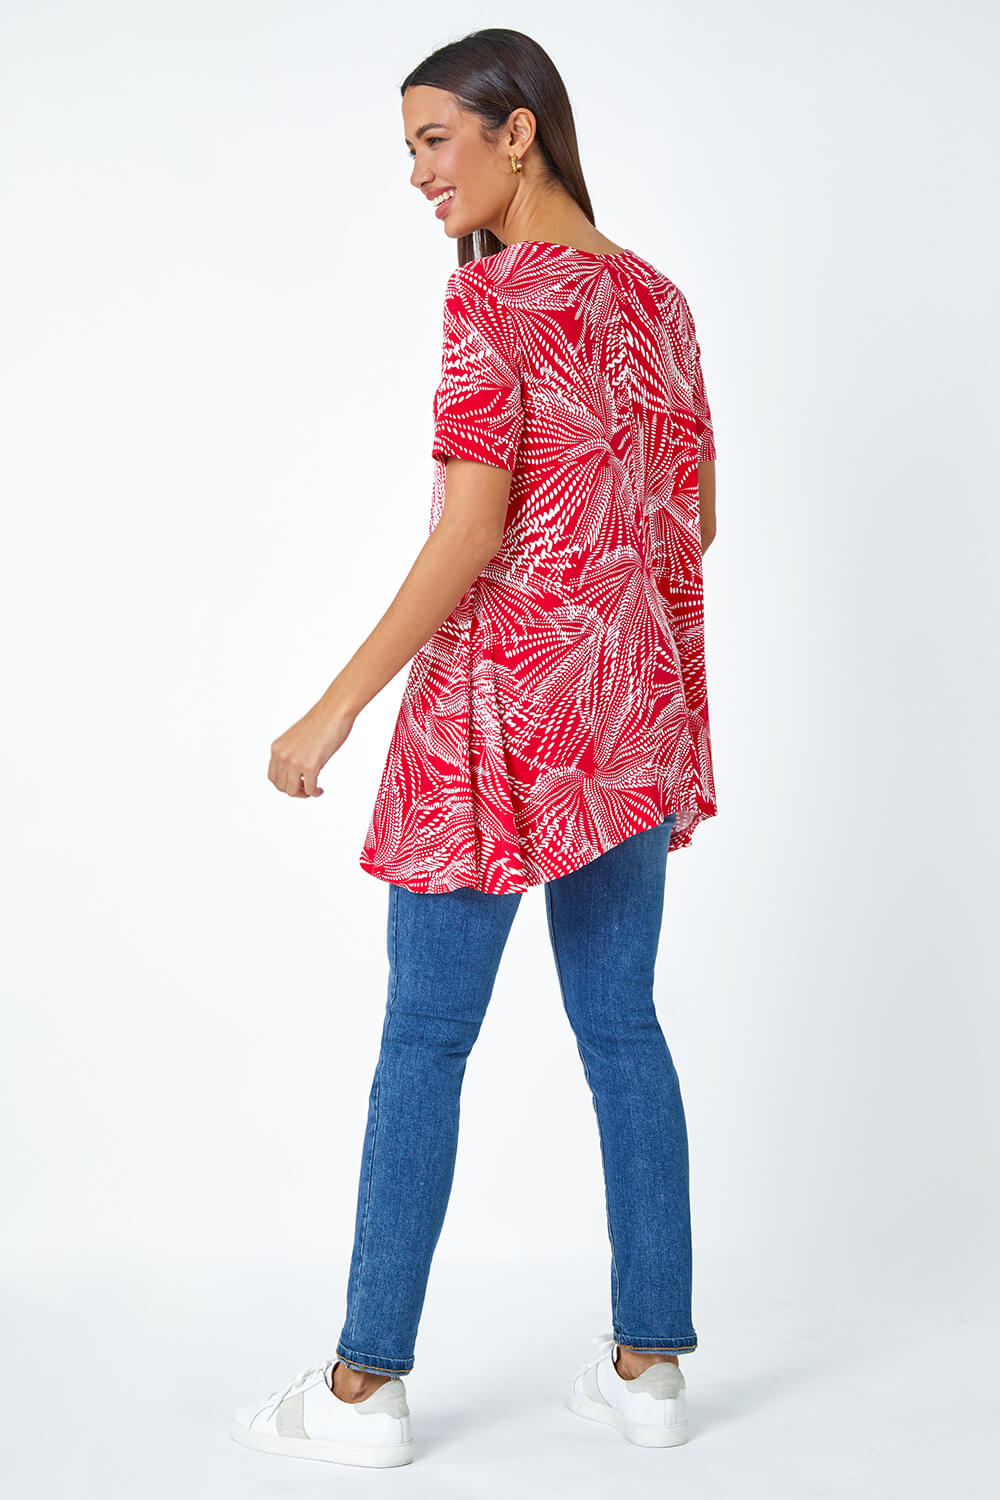 Red Textured Fan Print Stretch Hanky Hem Top, Image 3 of 5